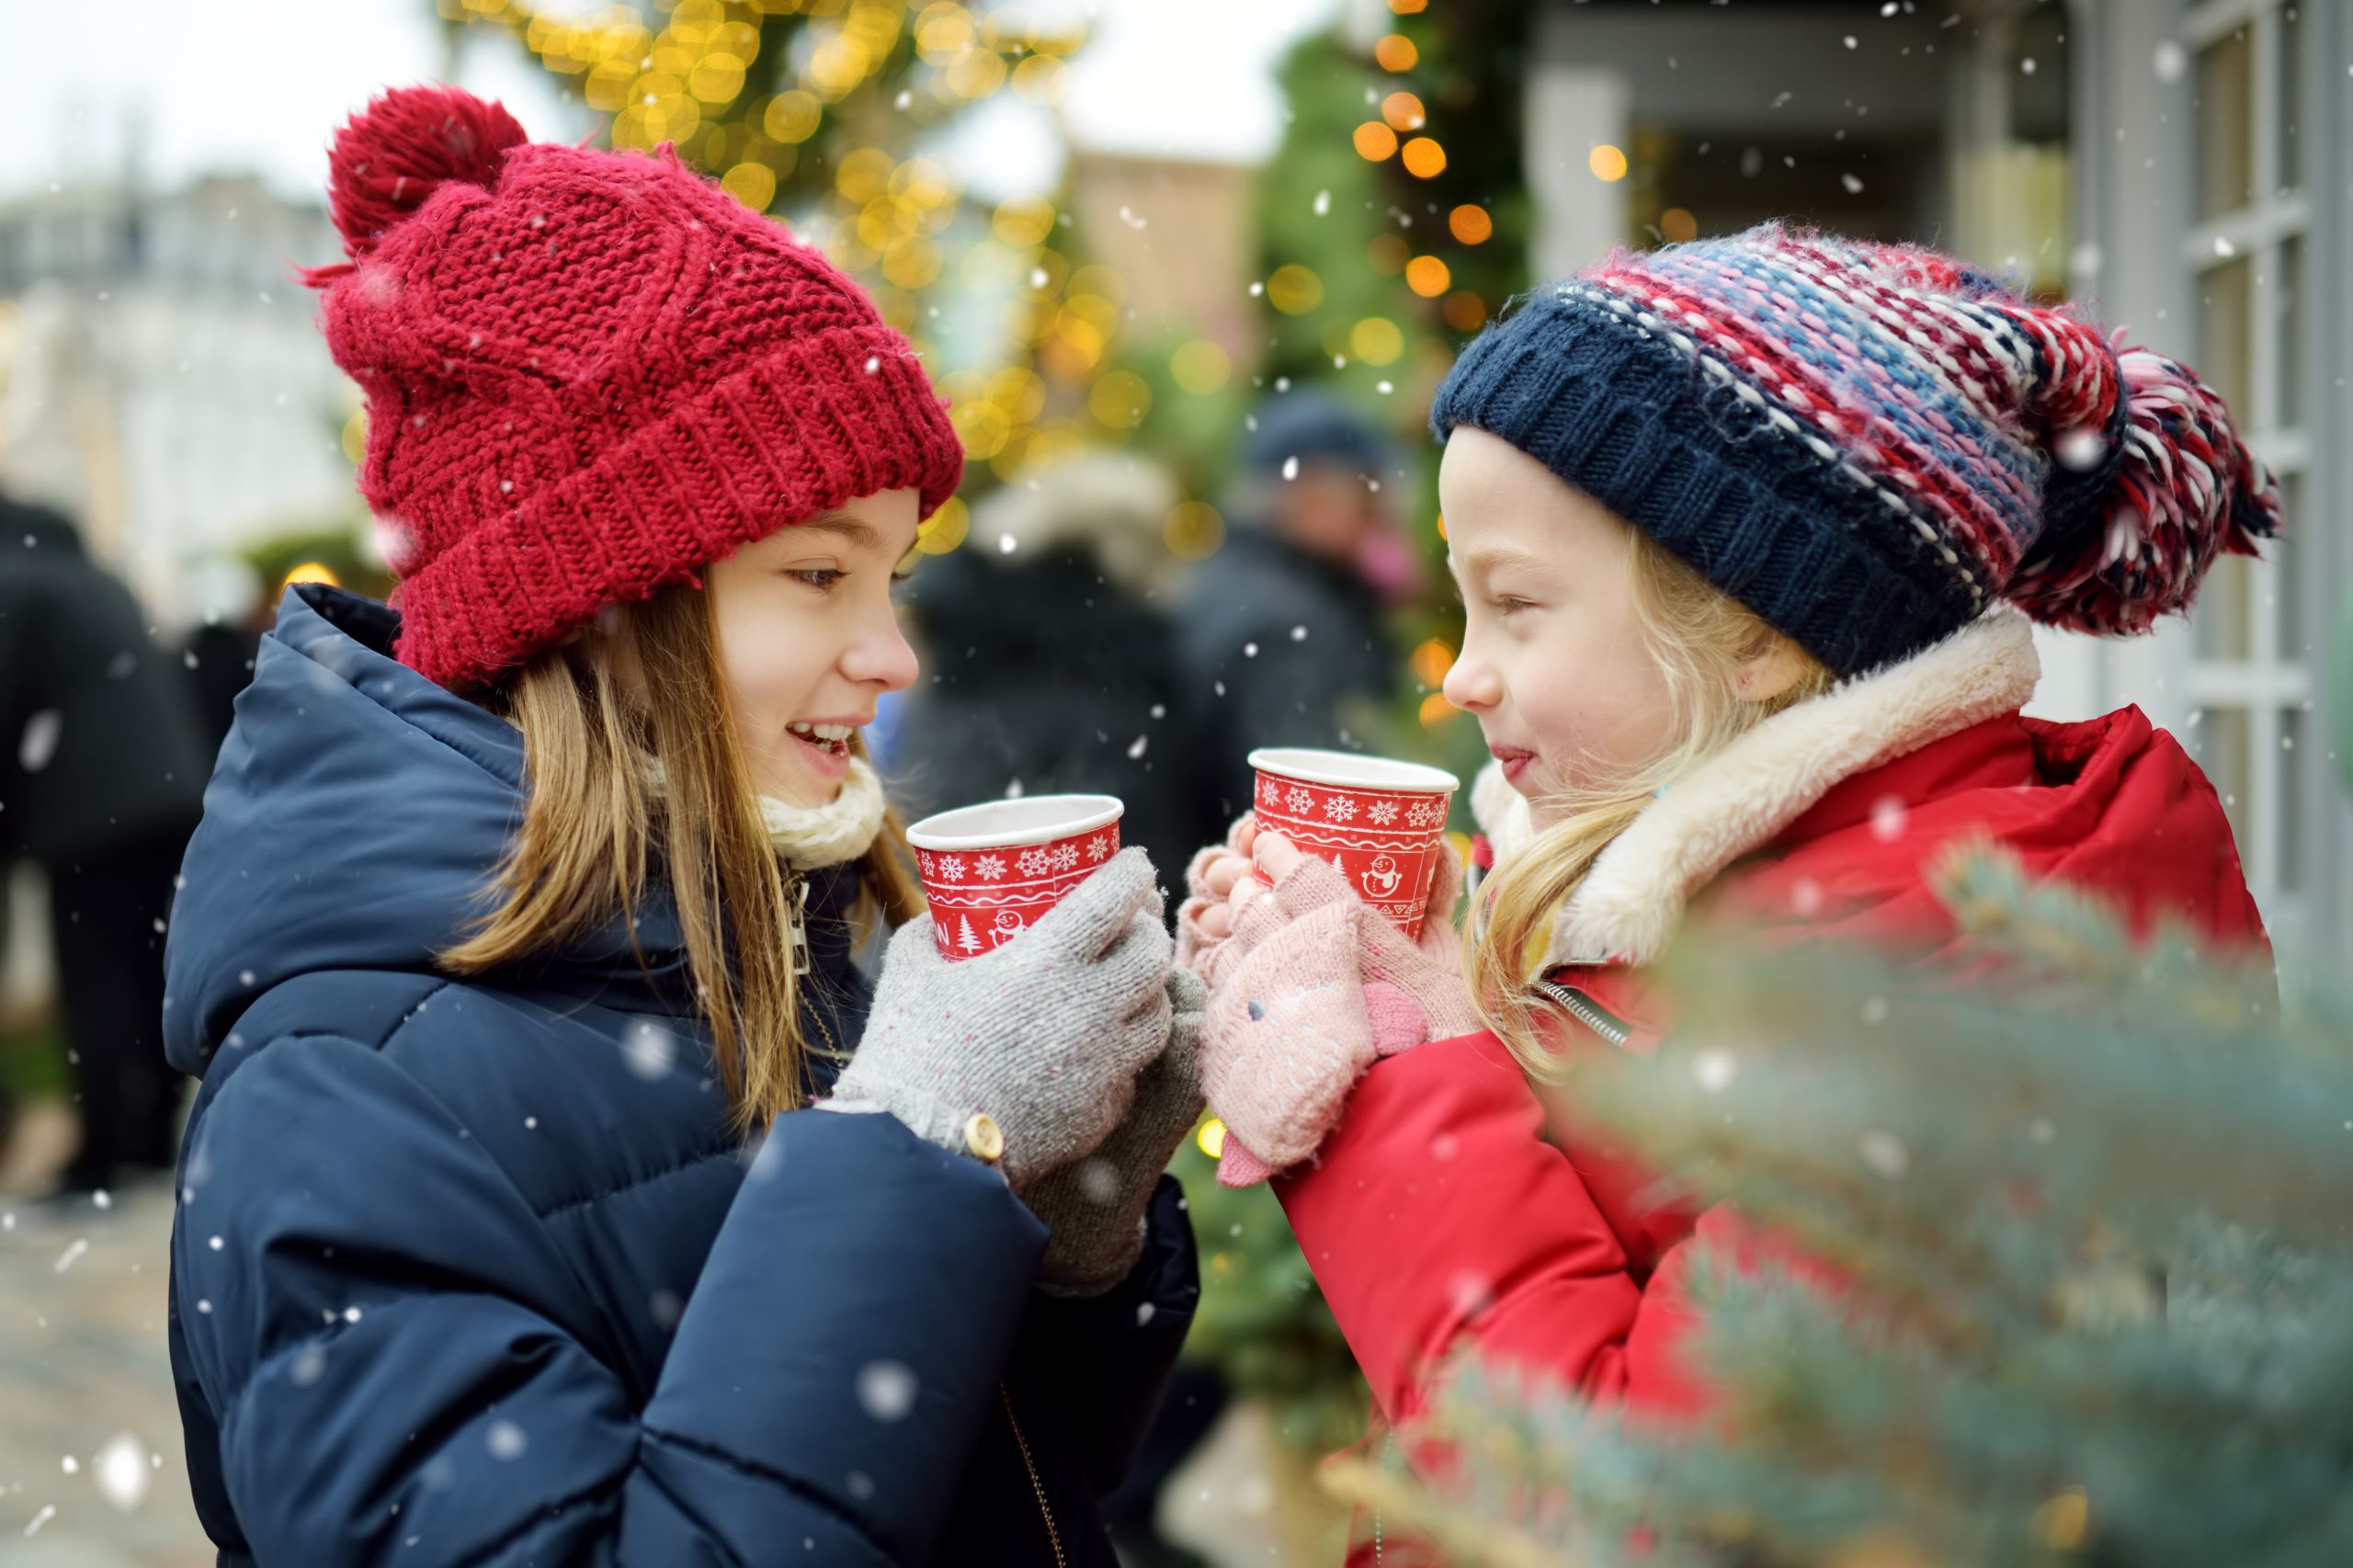 two little girls with coats, gloves and winter hats sipping hot chocolate | Natural Bridge Caverns